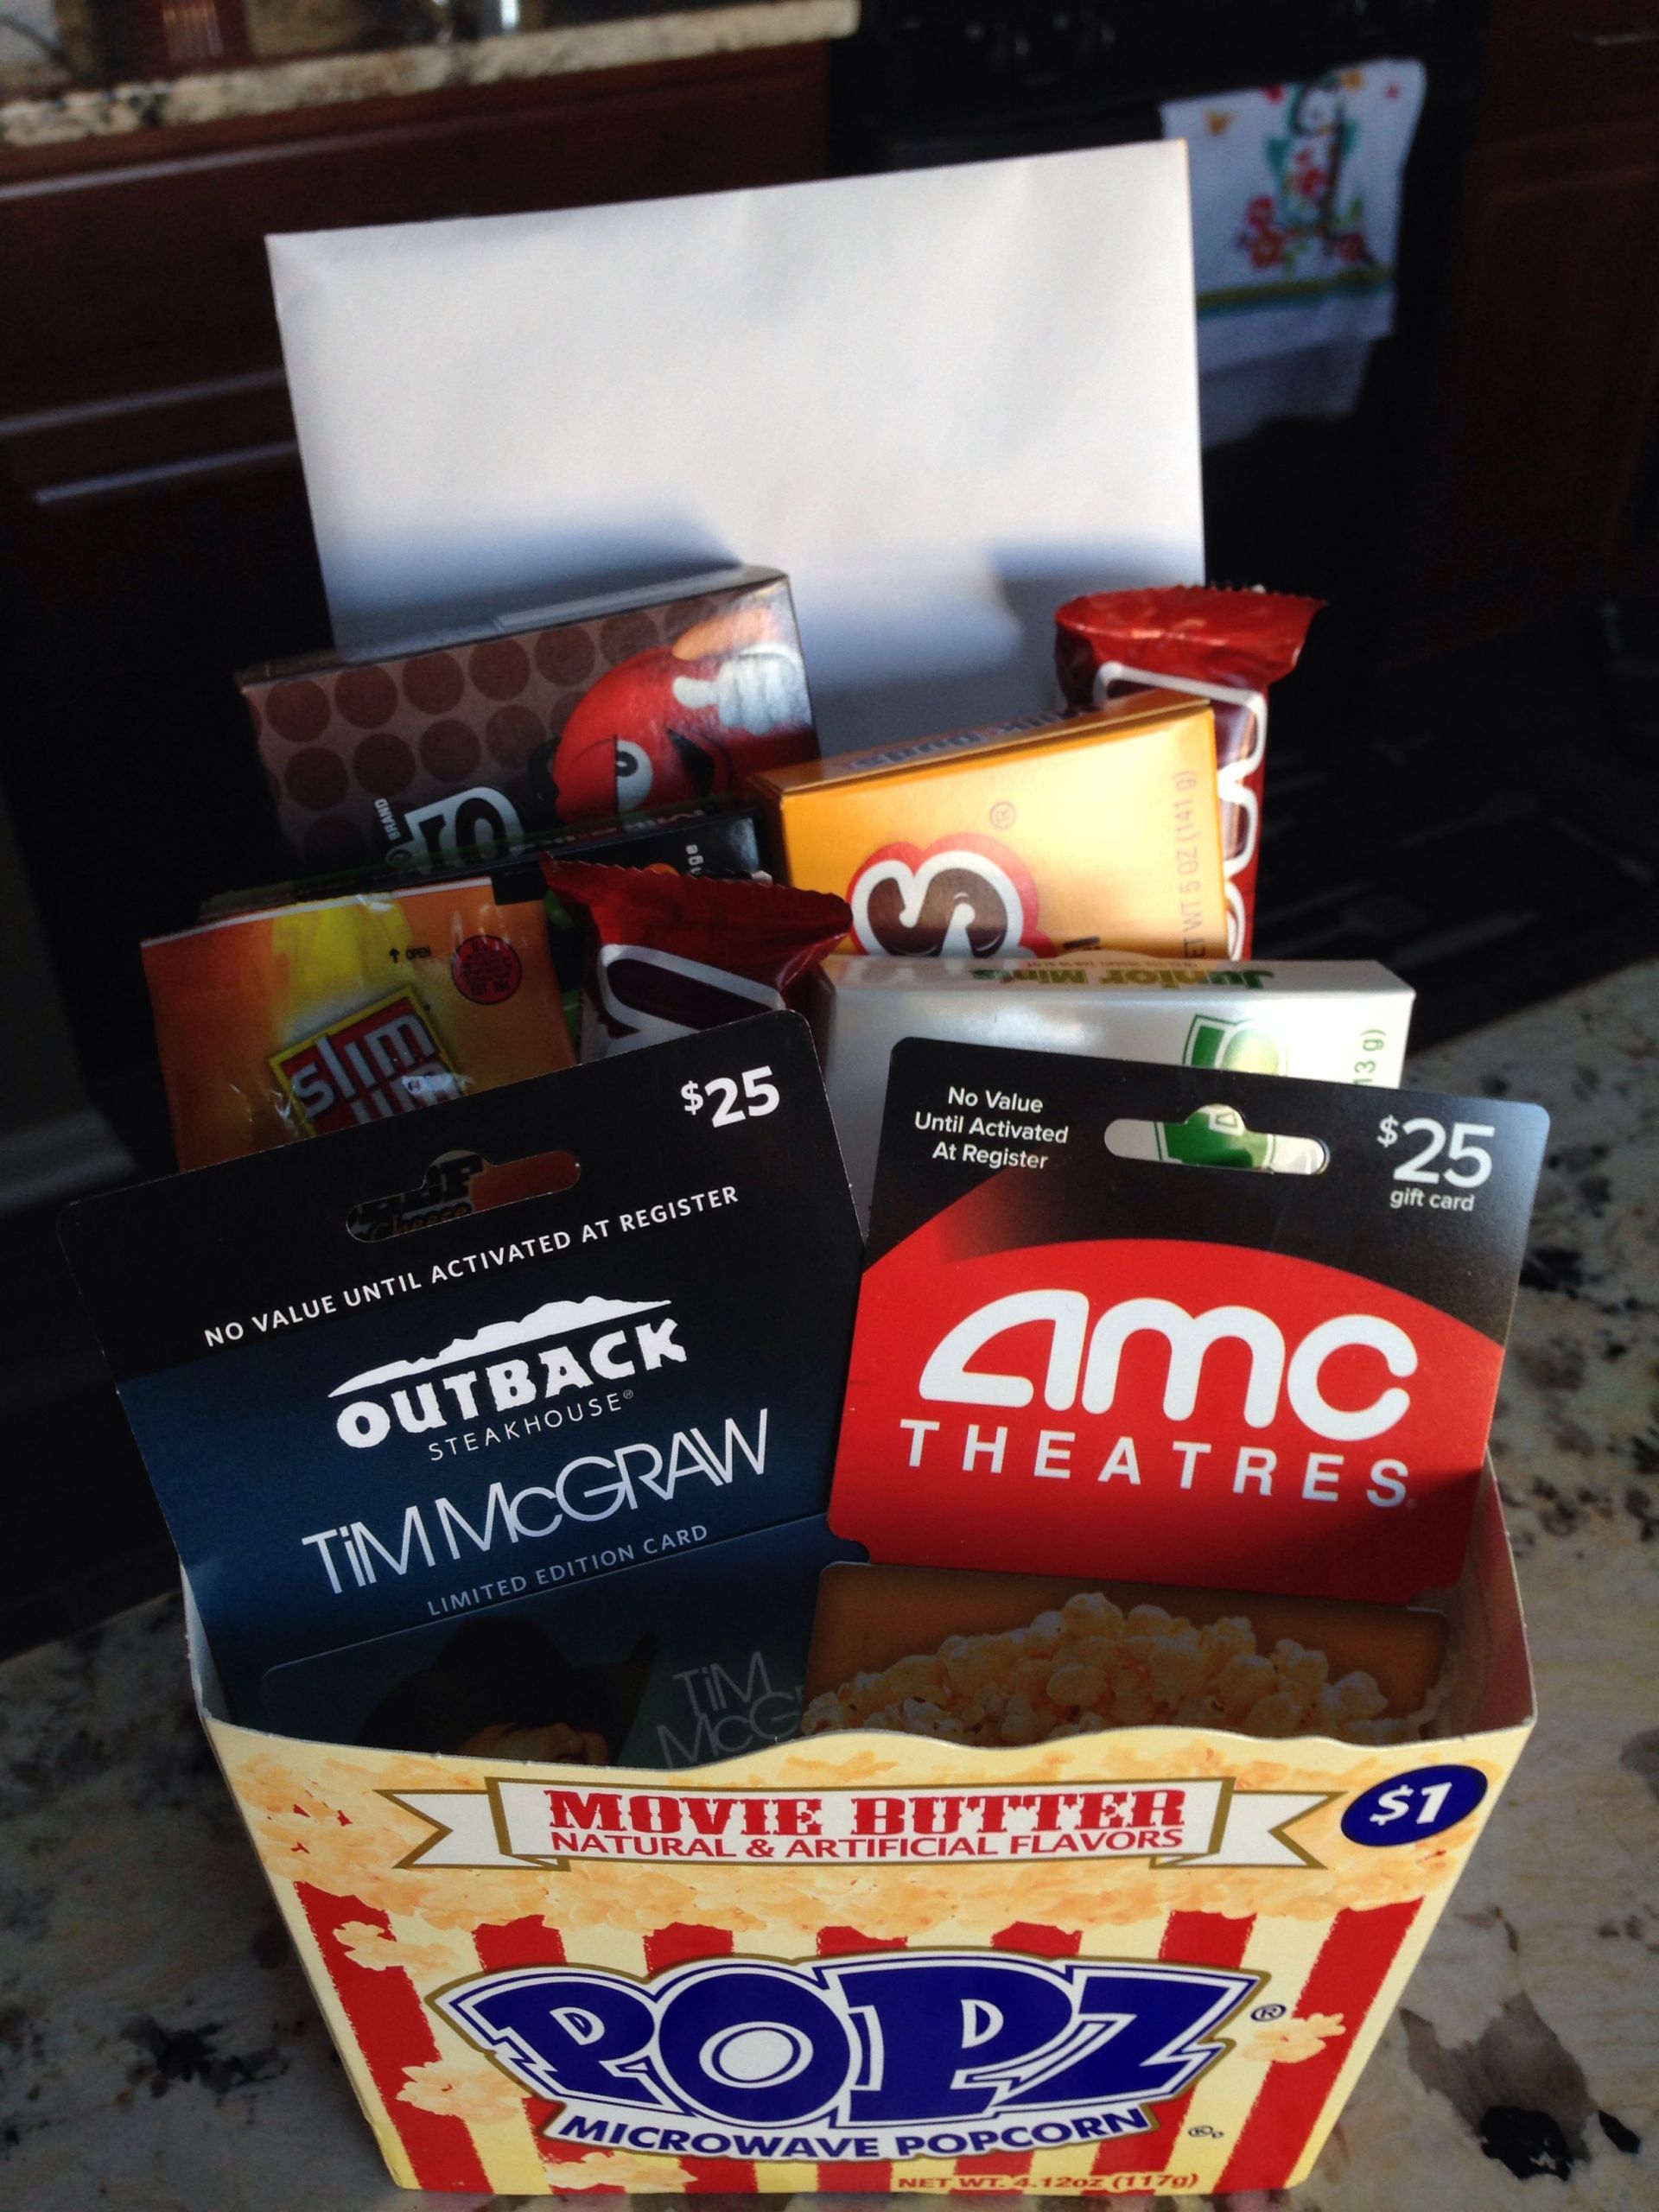 Movie Gift Card Basket Ideas
 The perfect t for your movie lover "Dinner and a Movie